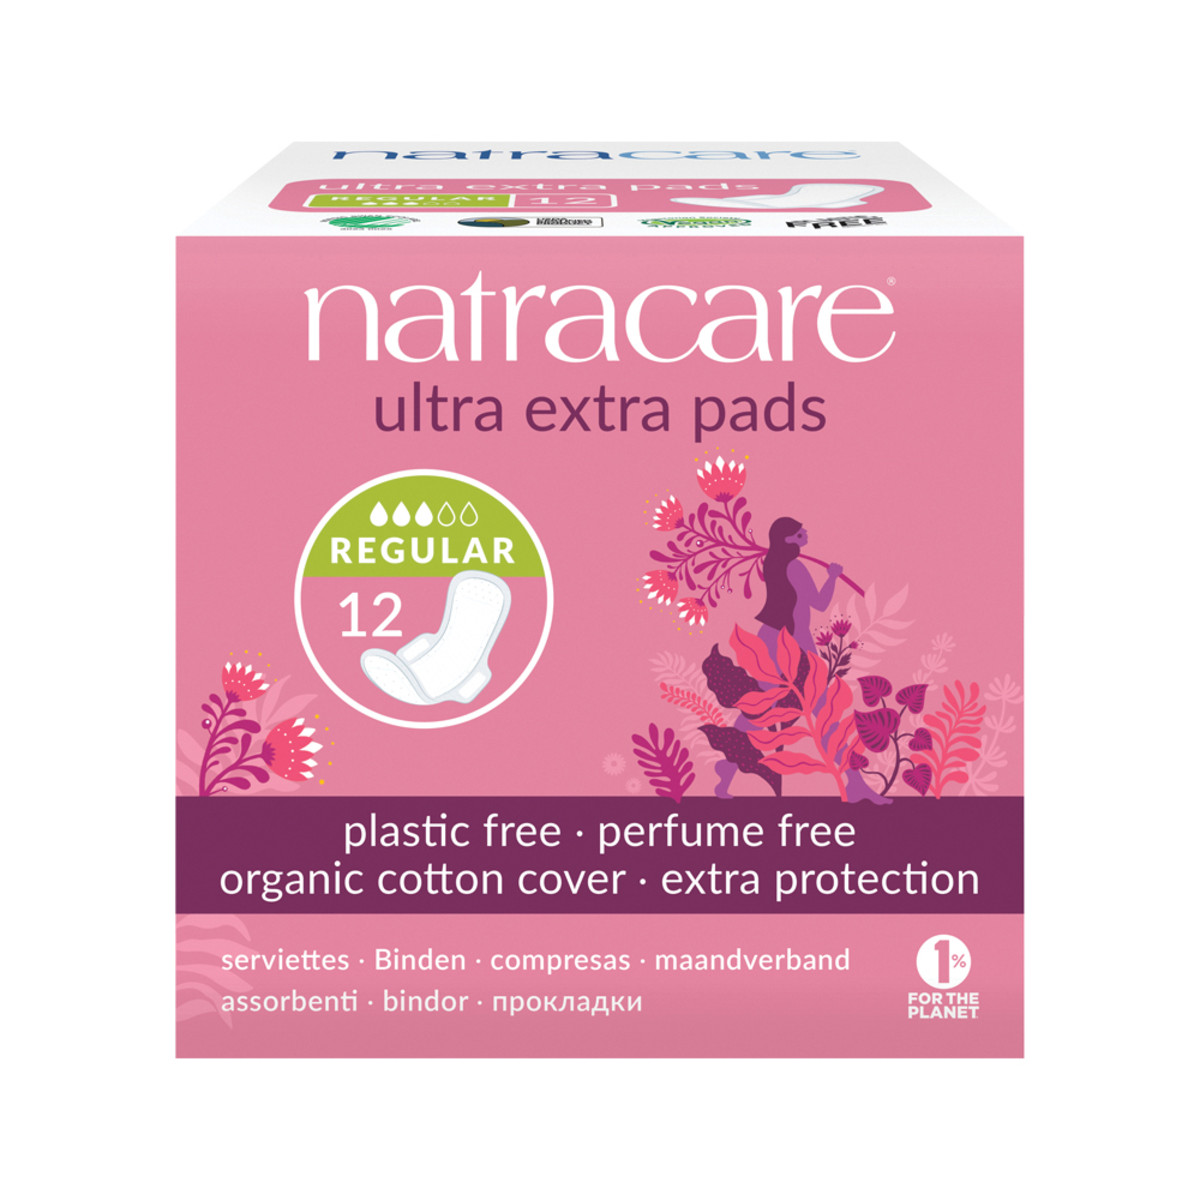 Natracare Ultra Extra Pads Regular with Organic Cotton Cover x 12 Pack